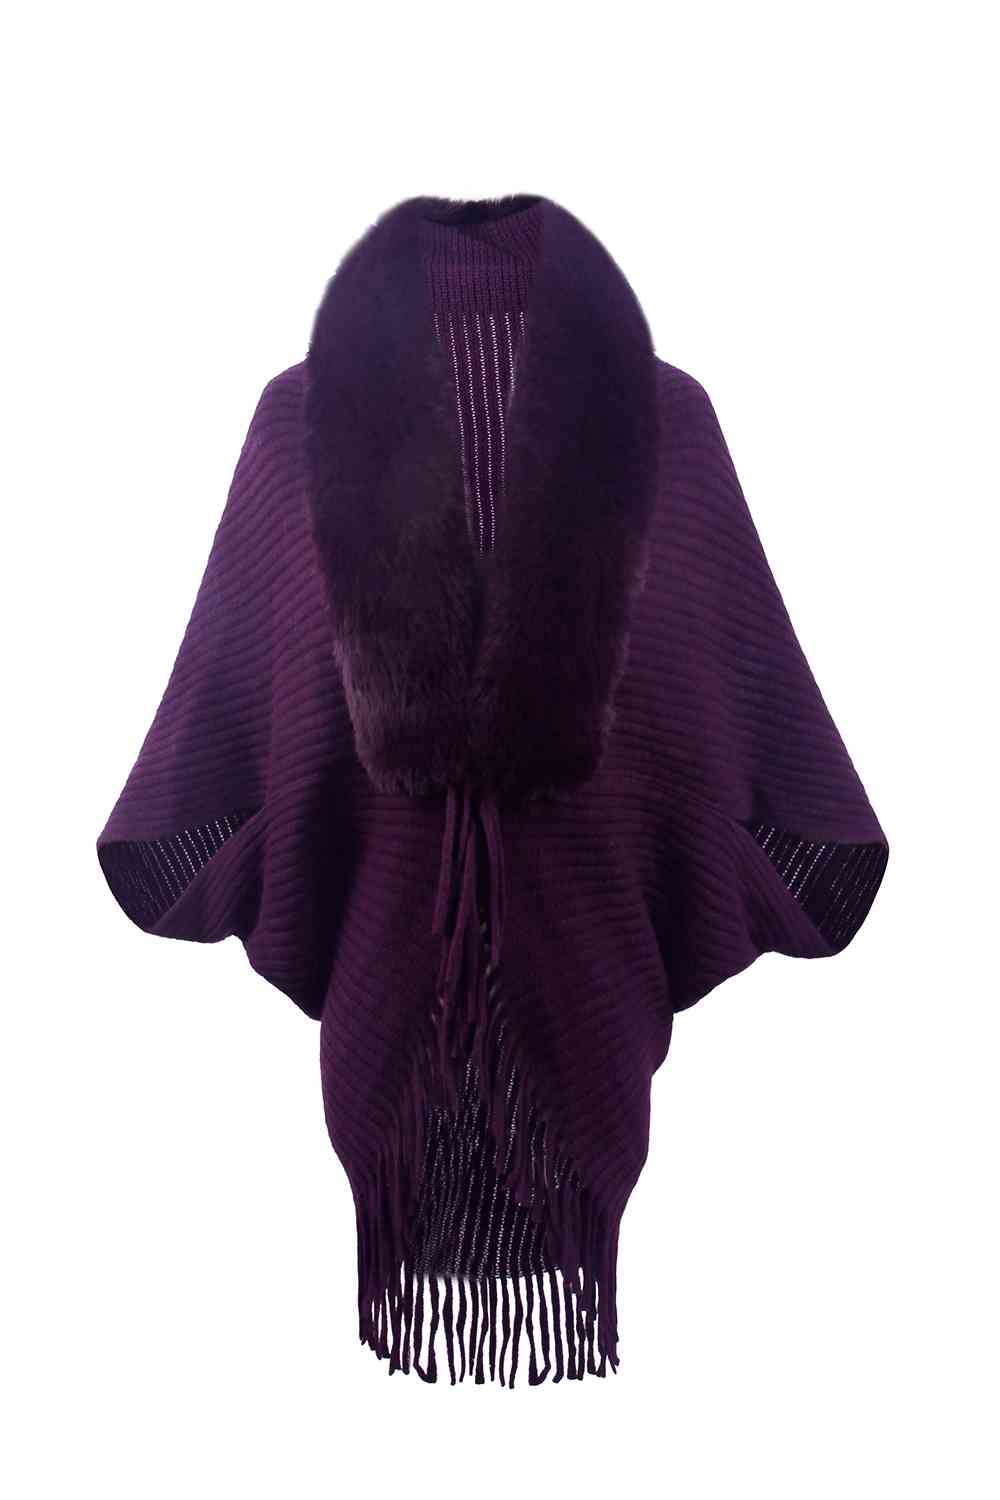 Purple open front poncho with fringe and faux fur trim